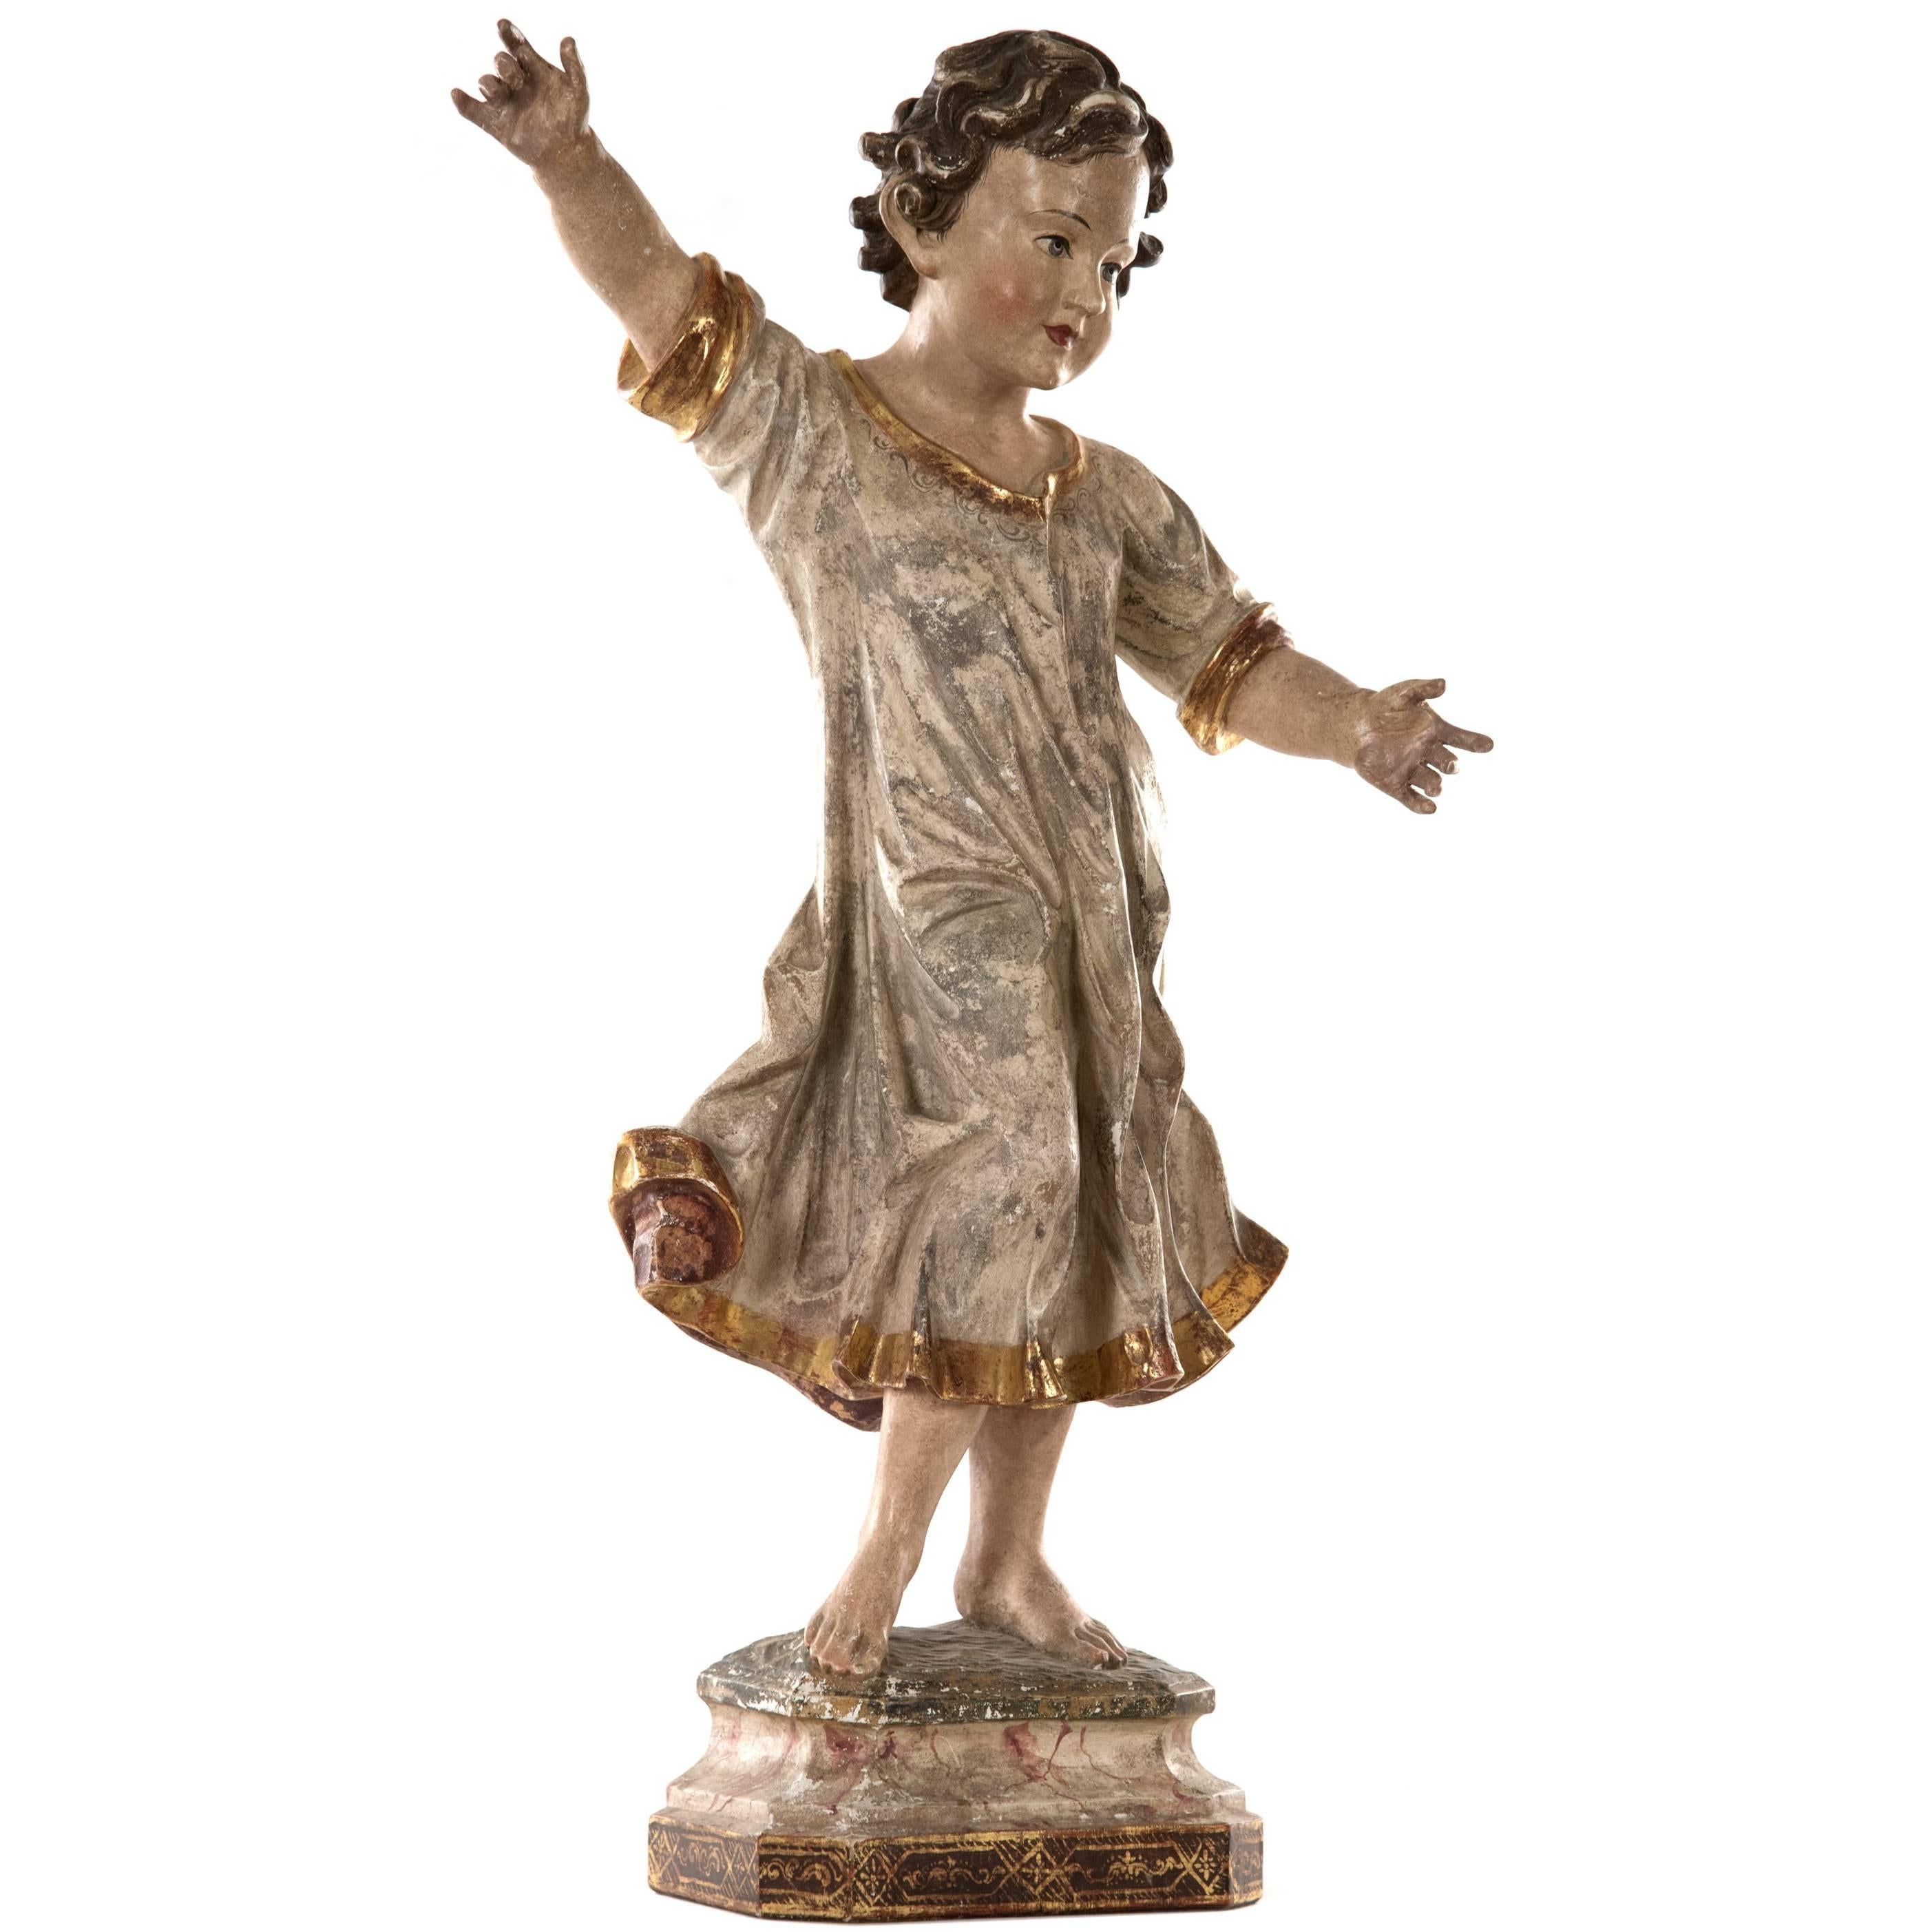 Ecclesiastical Hand-Carved and Painted Wooden Figure of a Young Boy